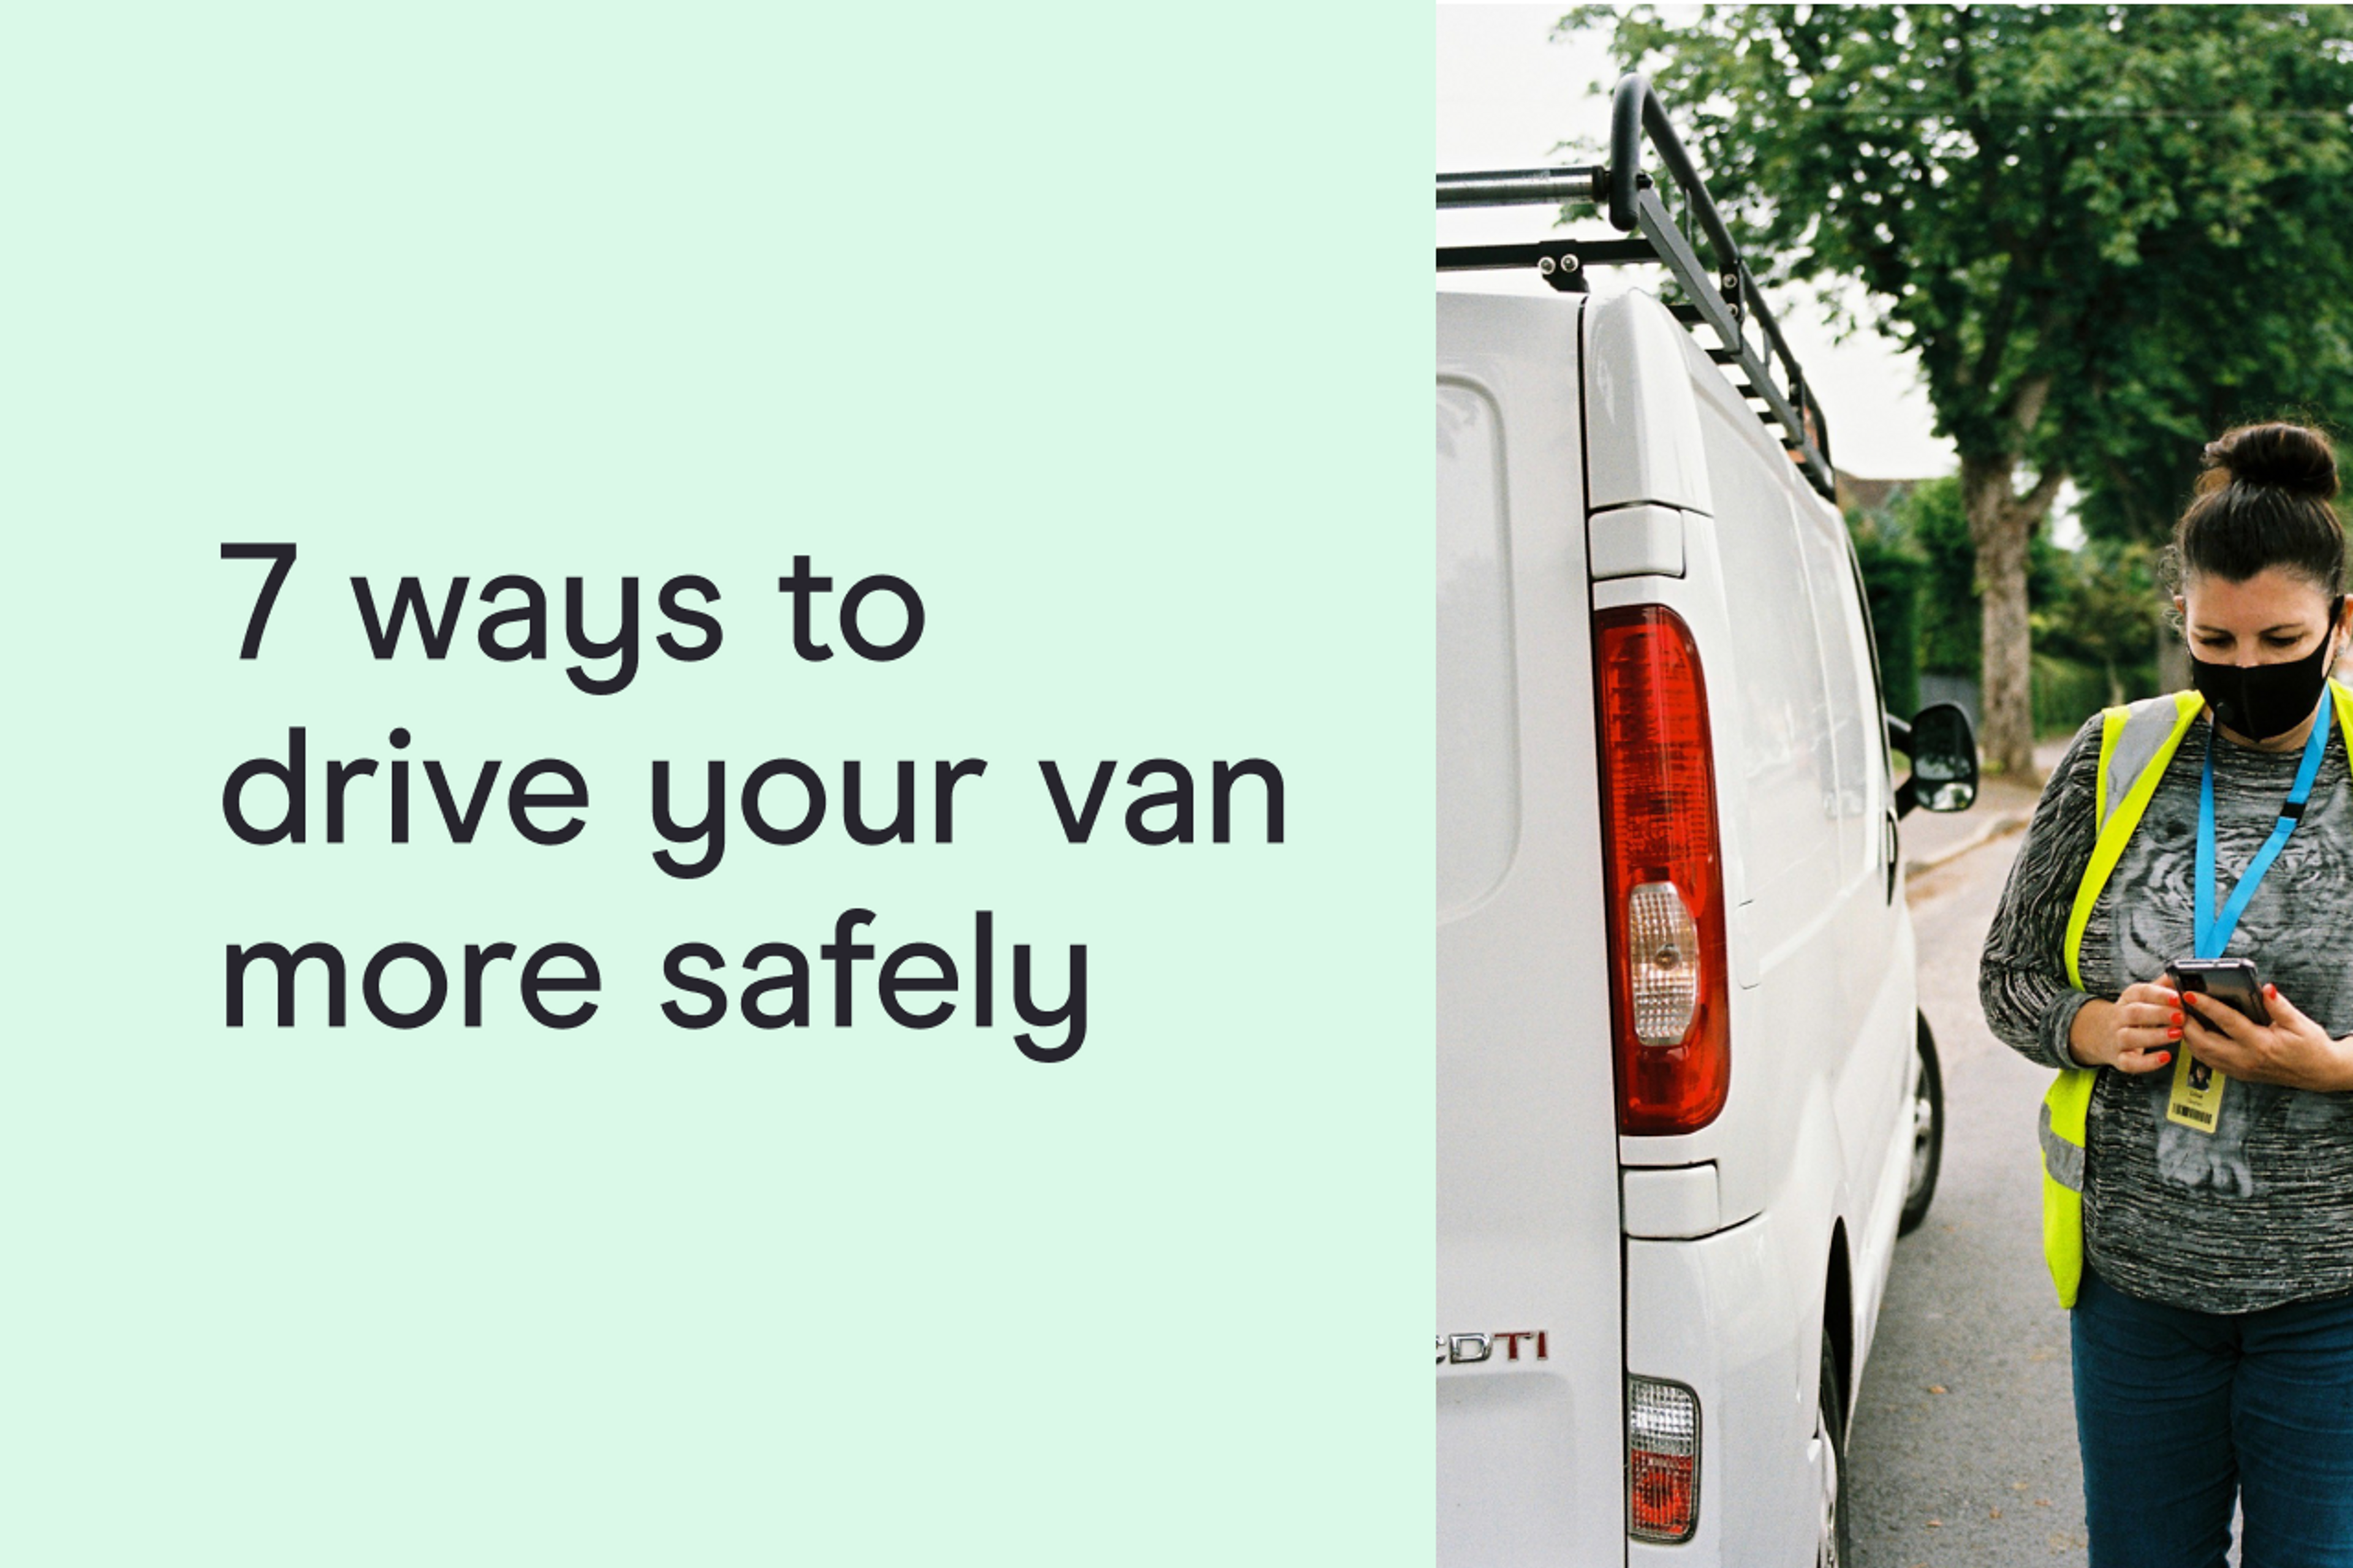 driving van safely featured blog post image from Zego